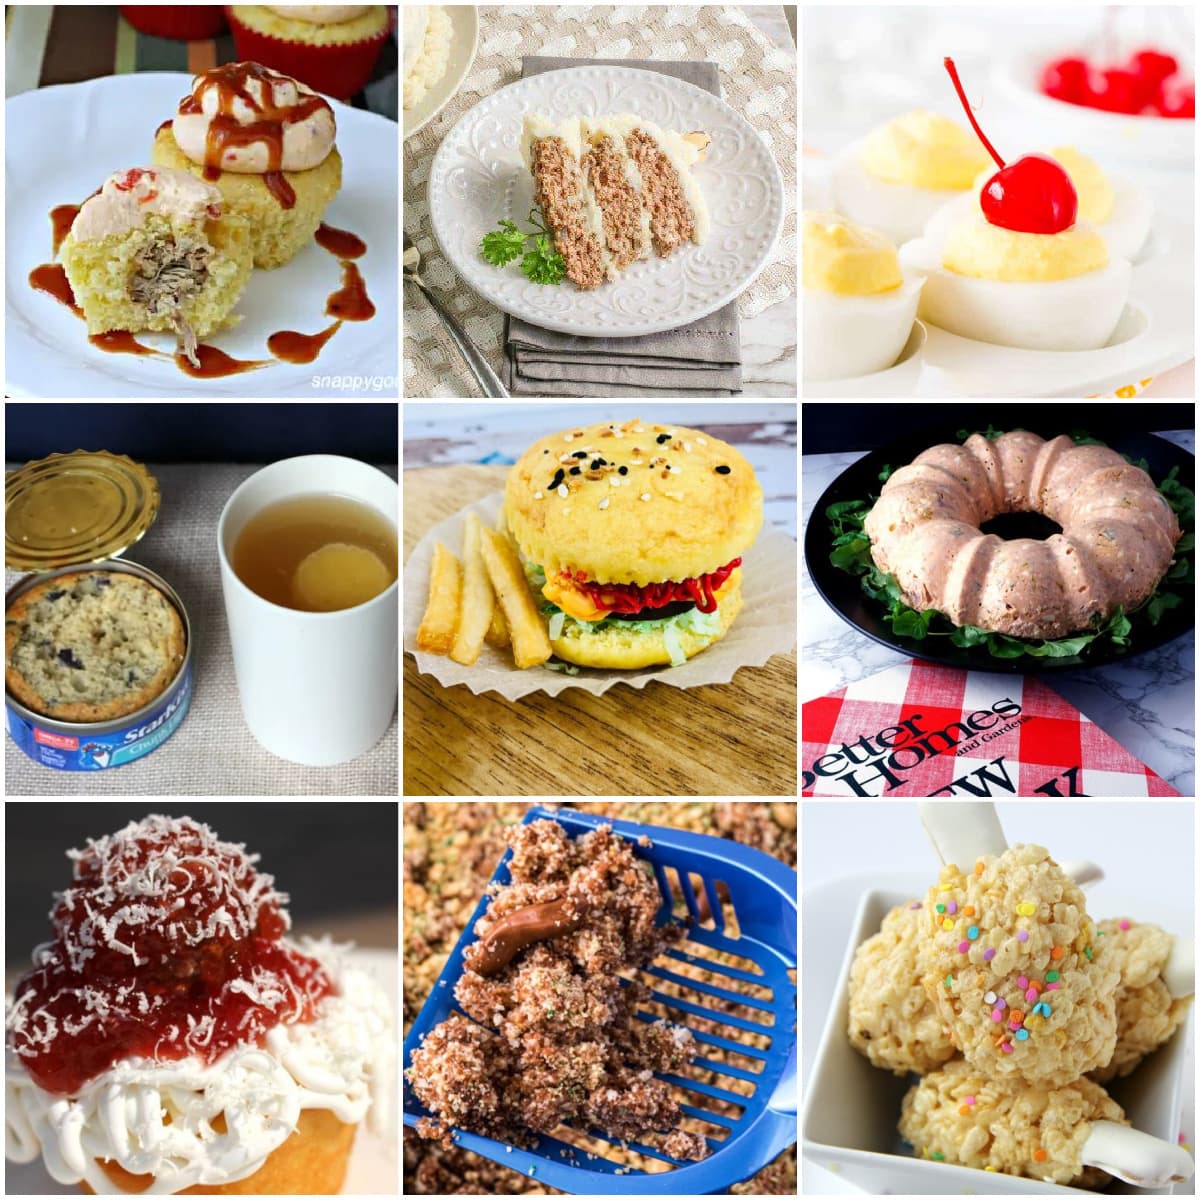 9-panel collage showing images of food and recipes from this April Fool's Day Food Prank roundup. 